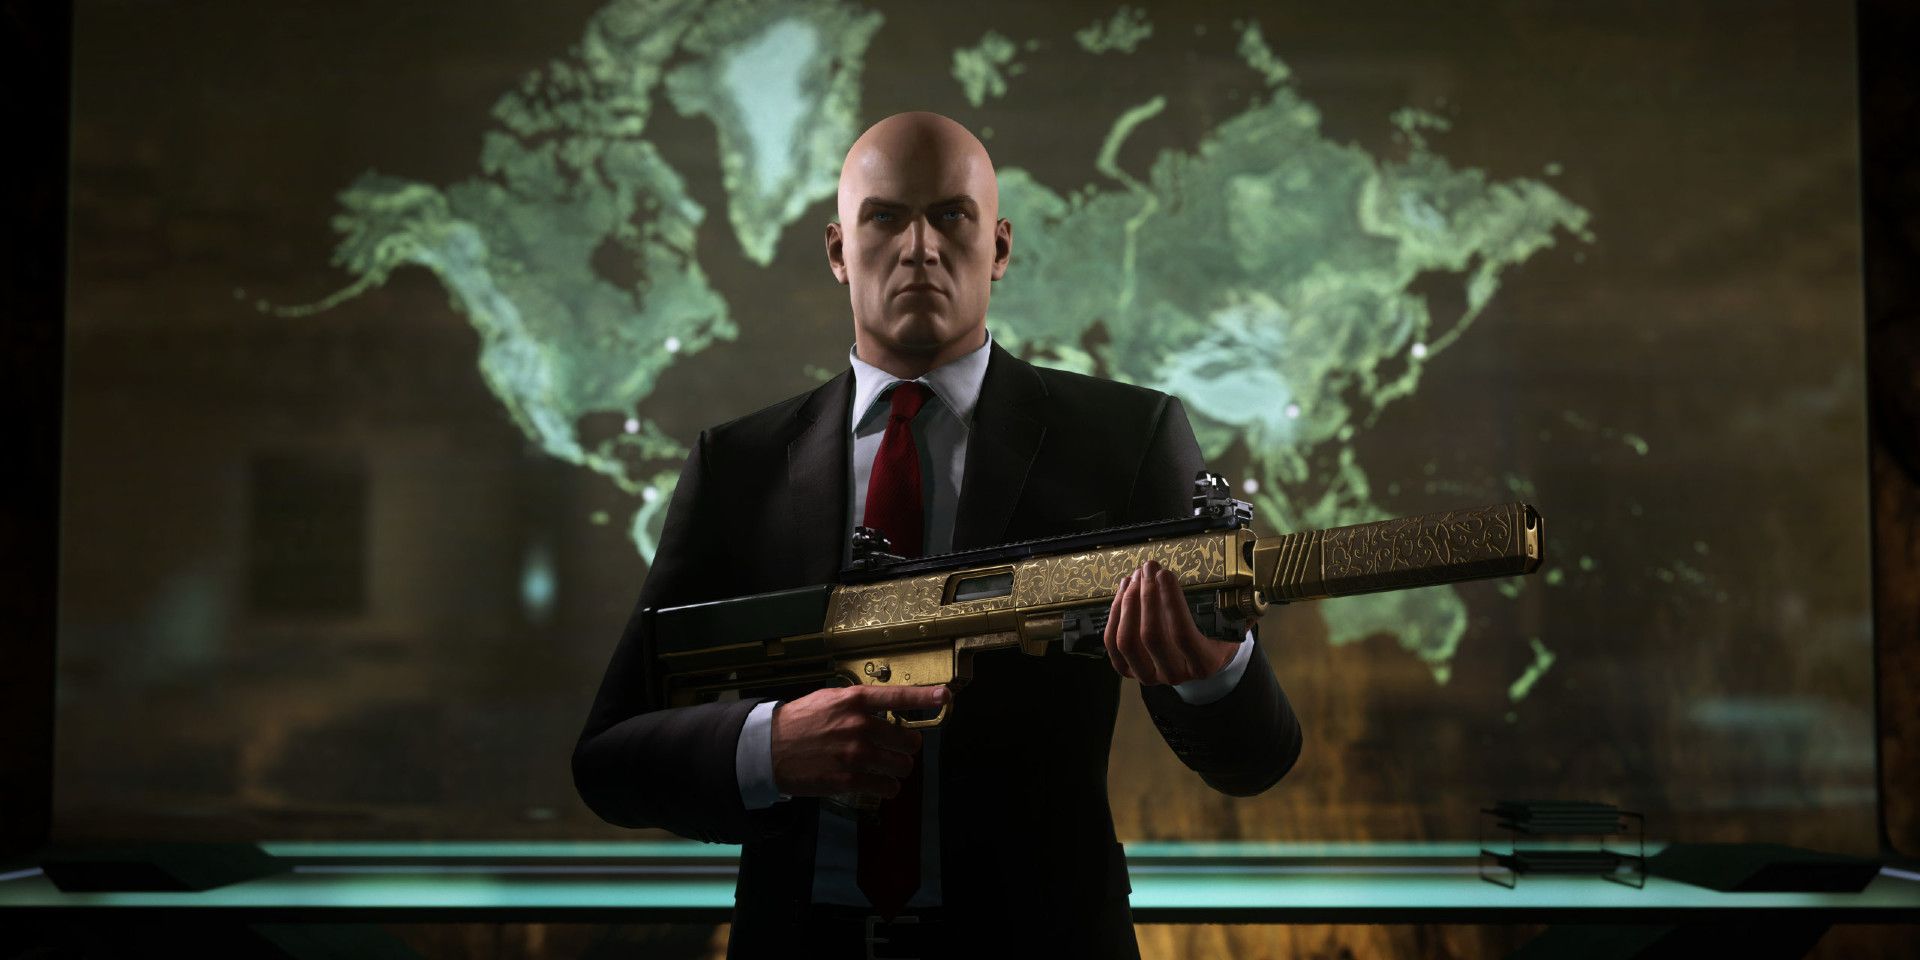 Hitman 3 Is Going From A Terrible Launch To An Incredible Deal